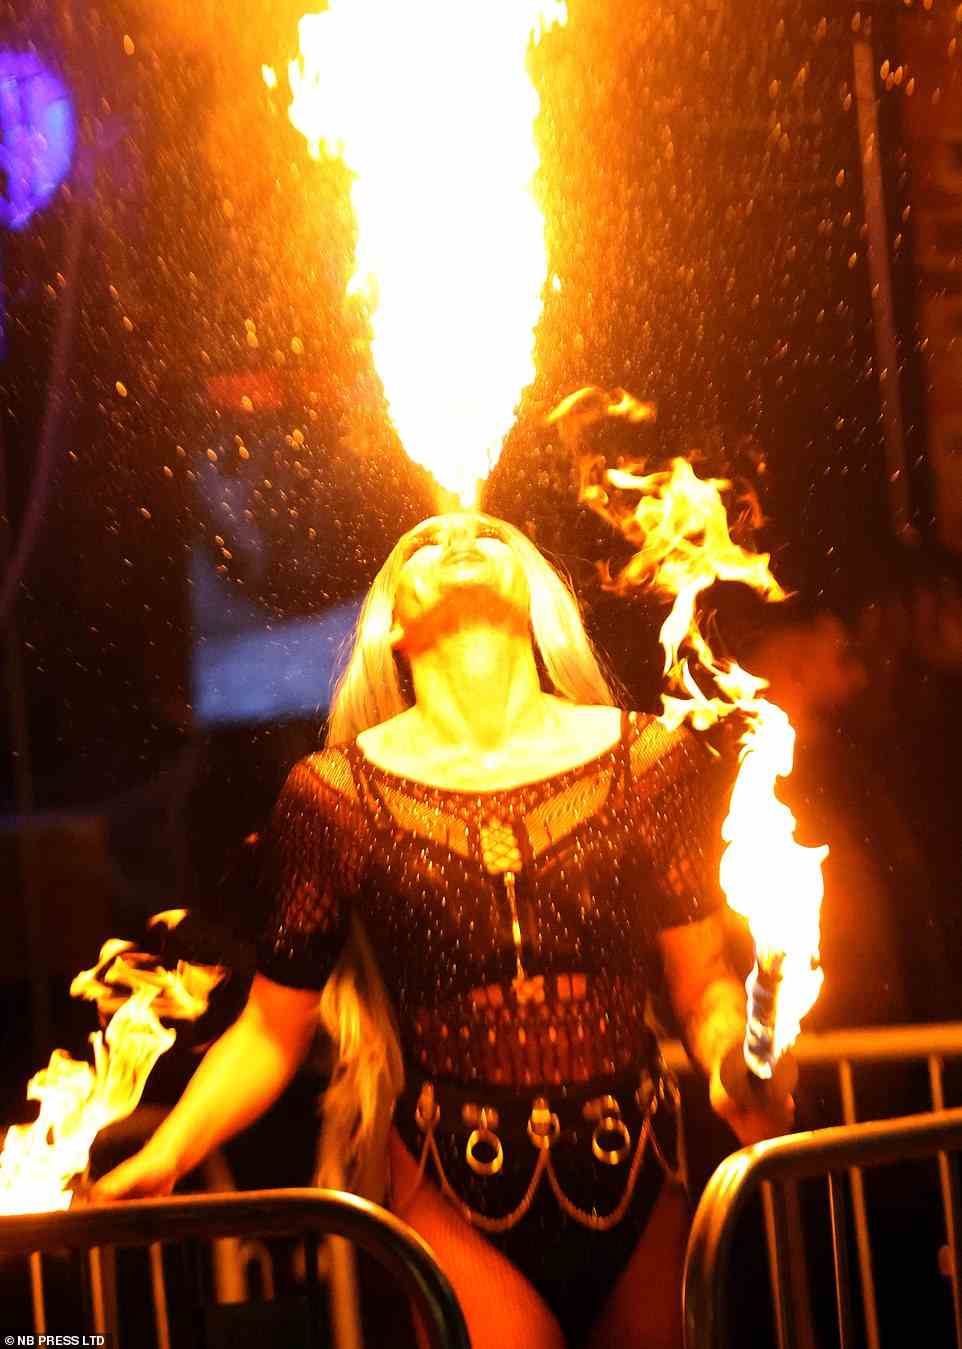 A street performer breathes a stunning plume of fire into the air on the streets of Leeds late on Friday night